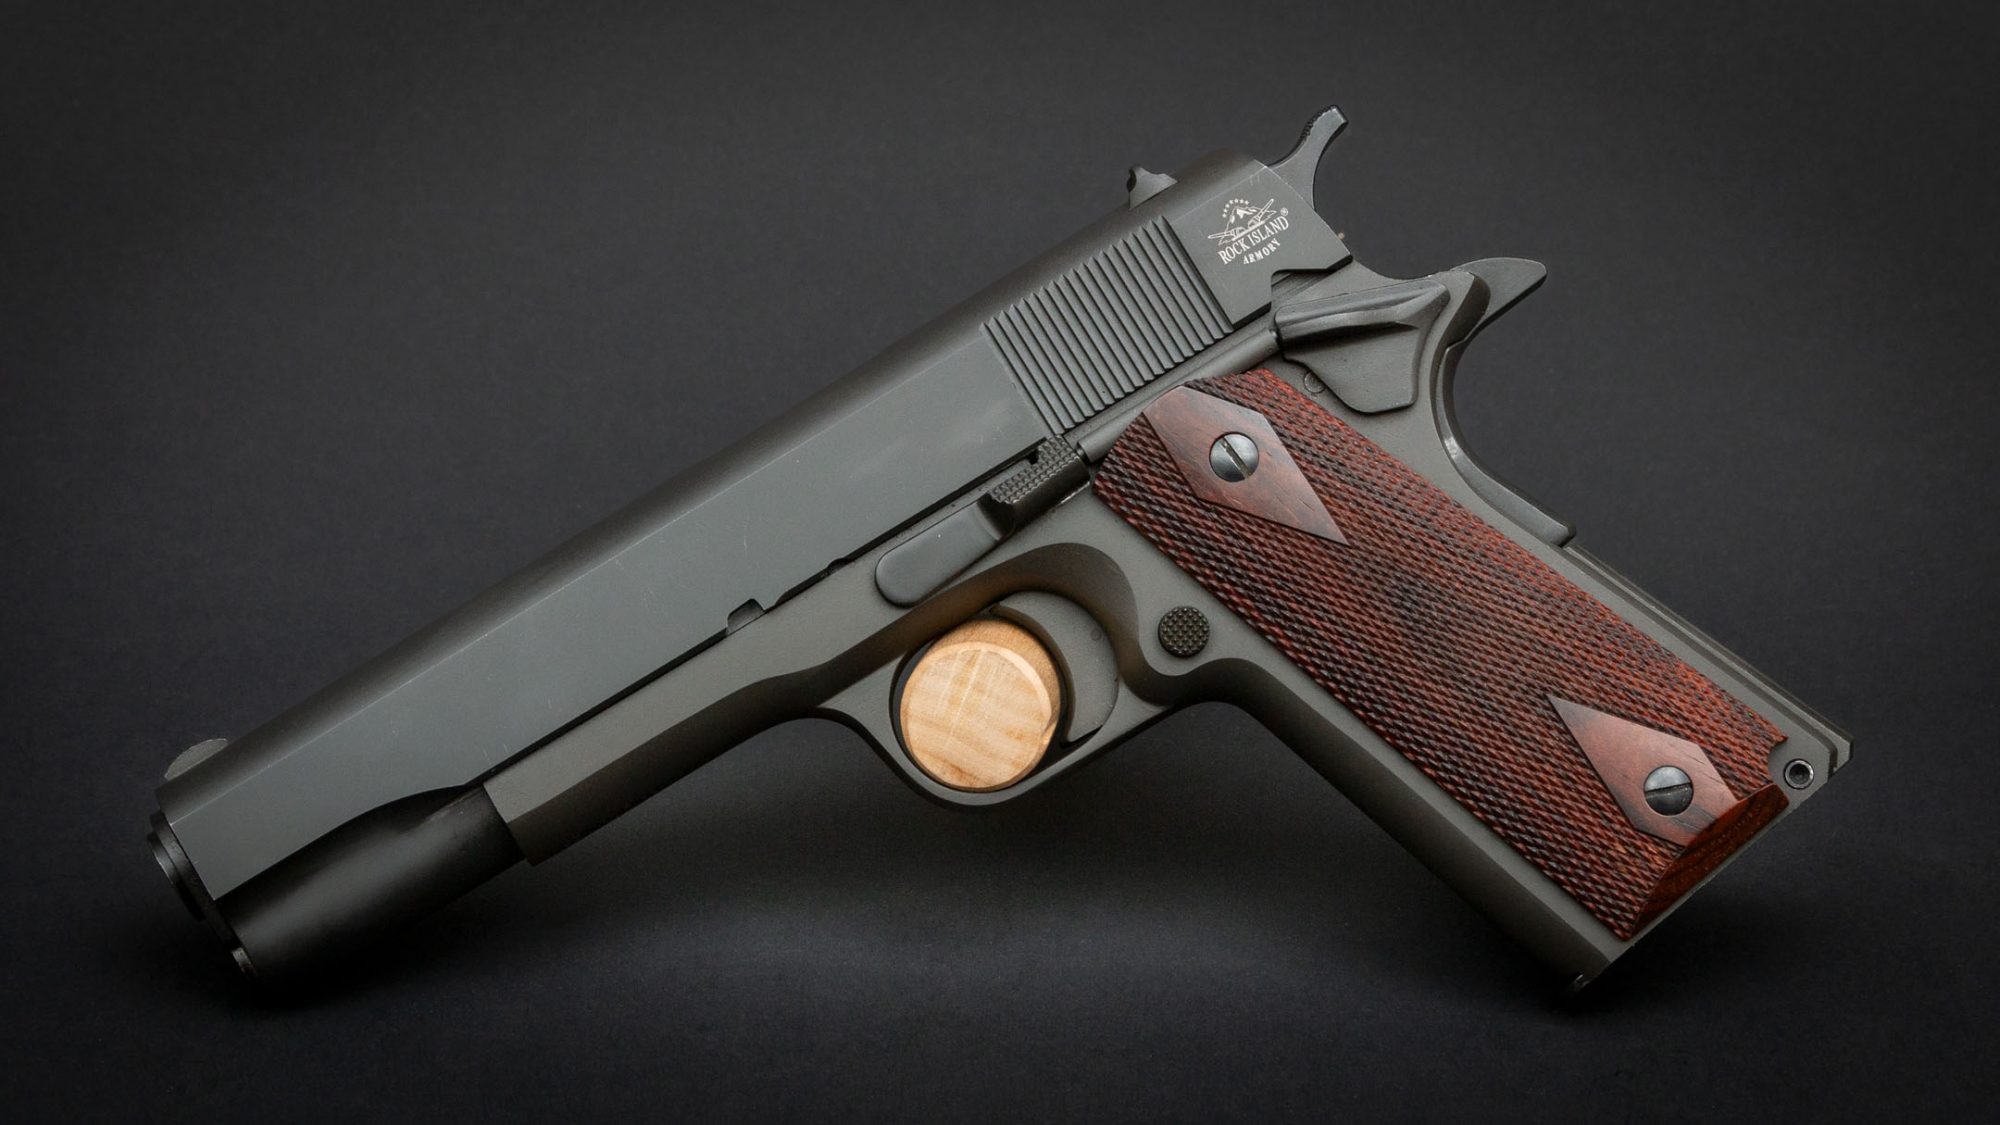 Rock Island Armory M1911 A1 GI Standard in 9mm, for sale by Turnbull Restoration Co. of Bloomfield, NY